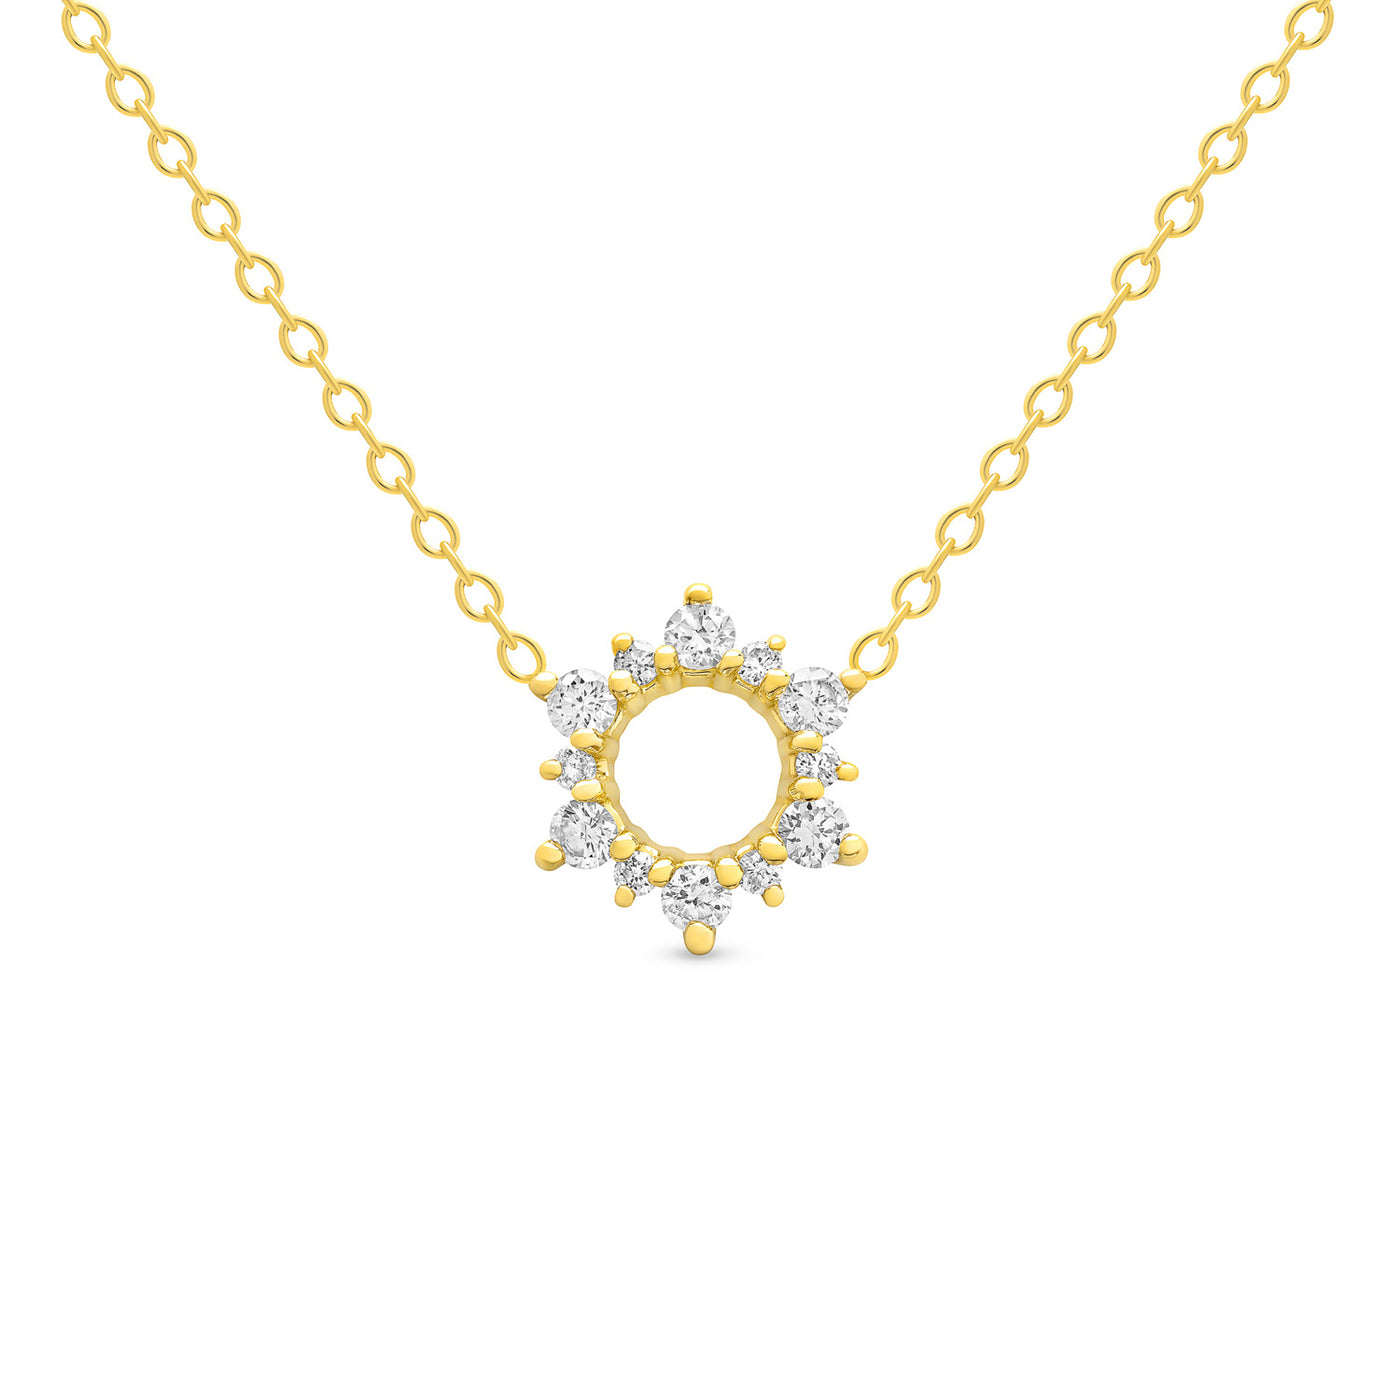 14K Solid Gold Open Cluster Halo Diamond Necklace